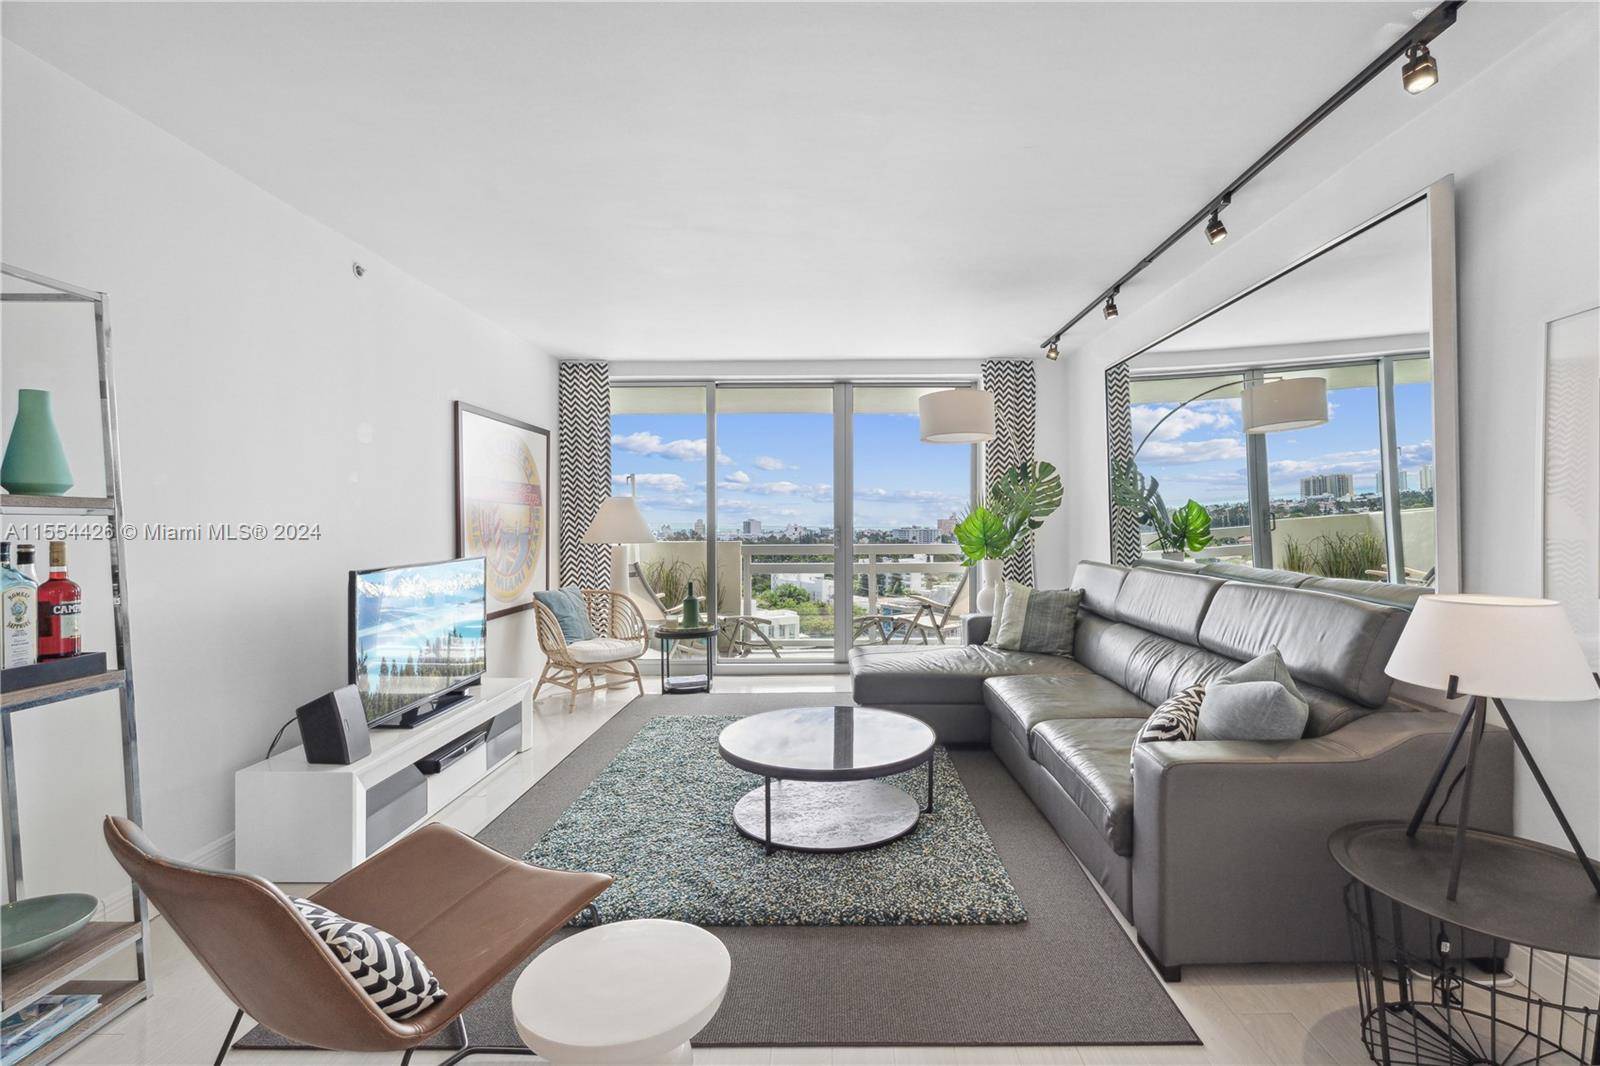 Fully furnished, renovated designer unit with gorgeous unobstructed breathtaking ocean and skyline views from the lower penthouse.